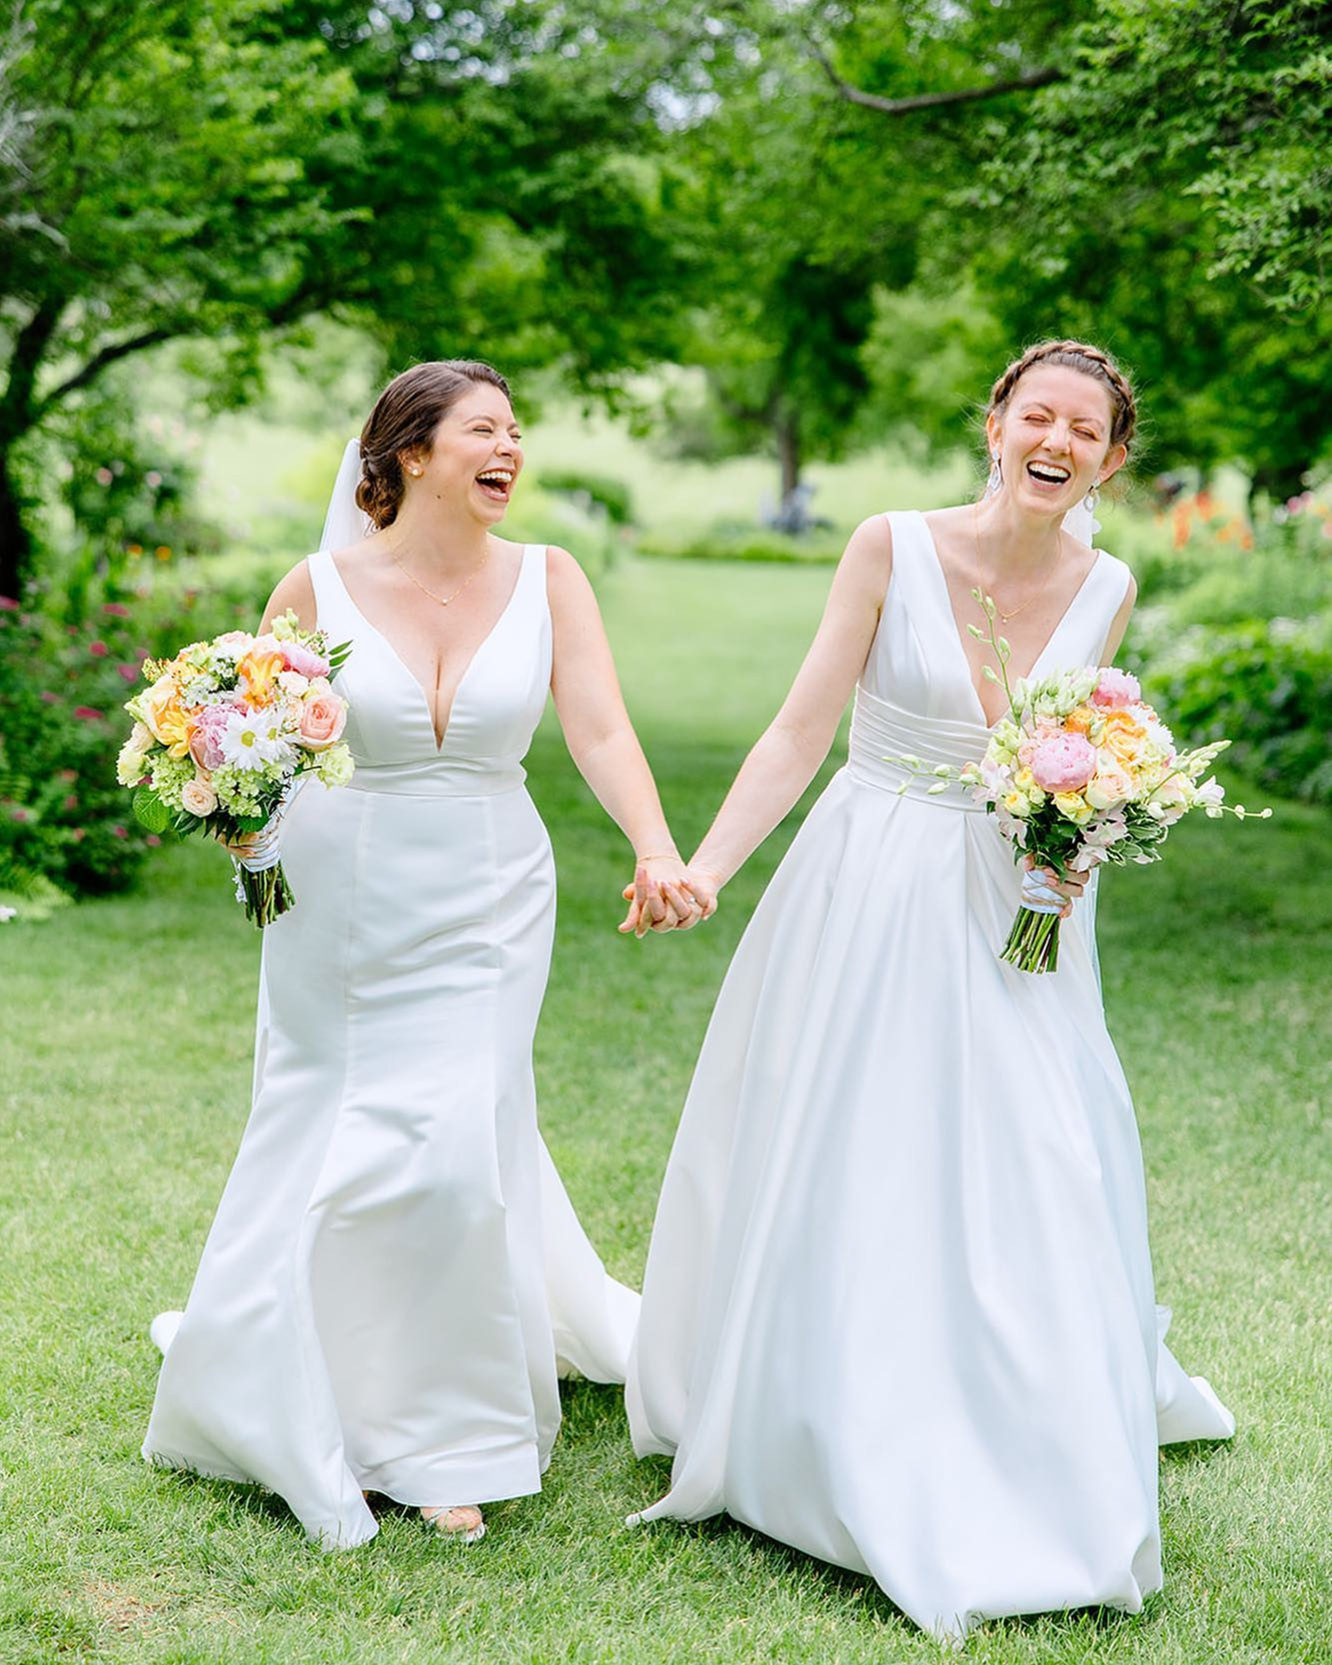 brides smiling and laughing while holding hands